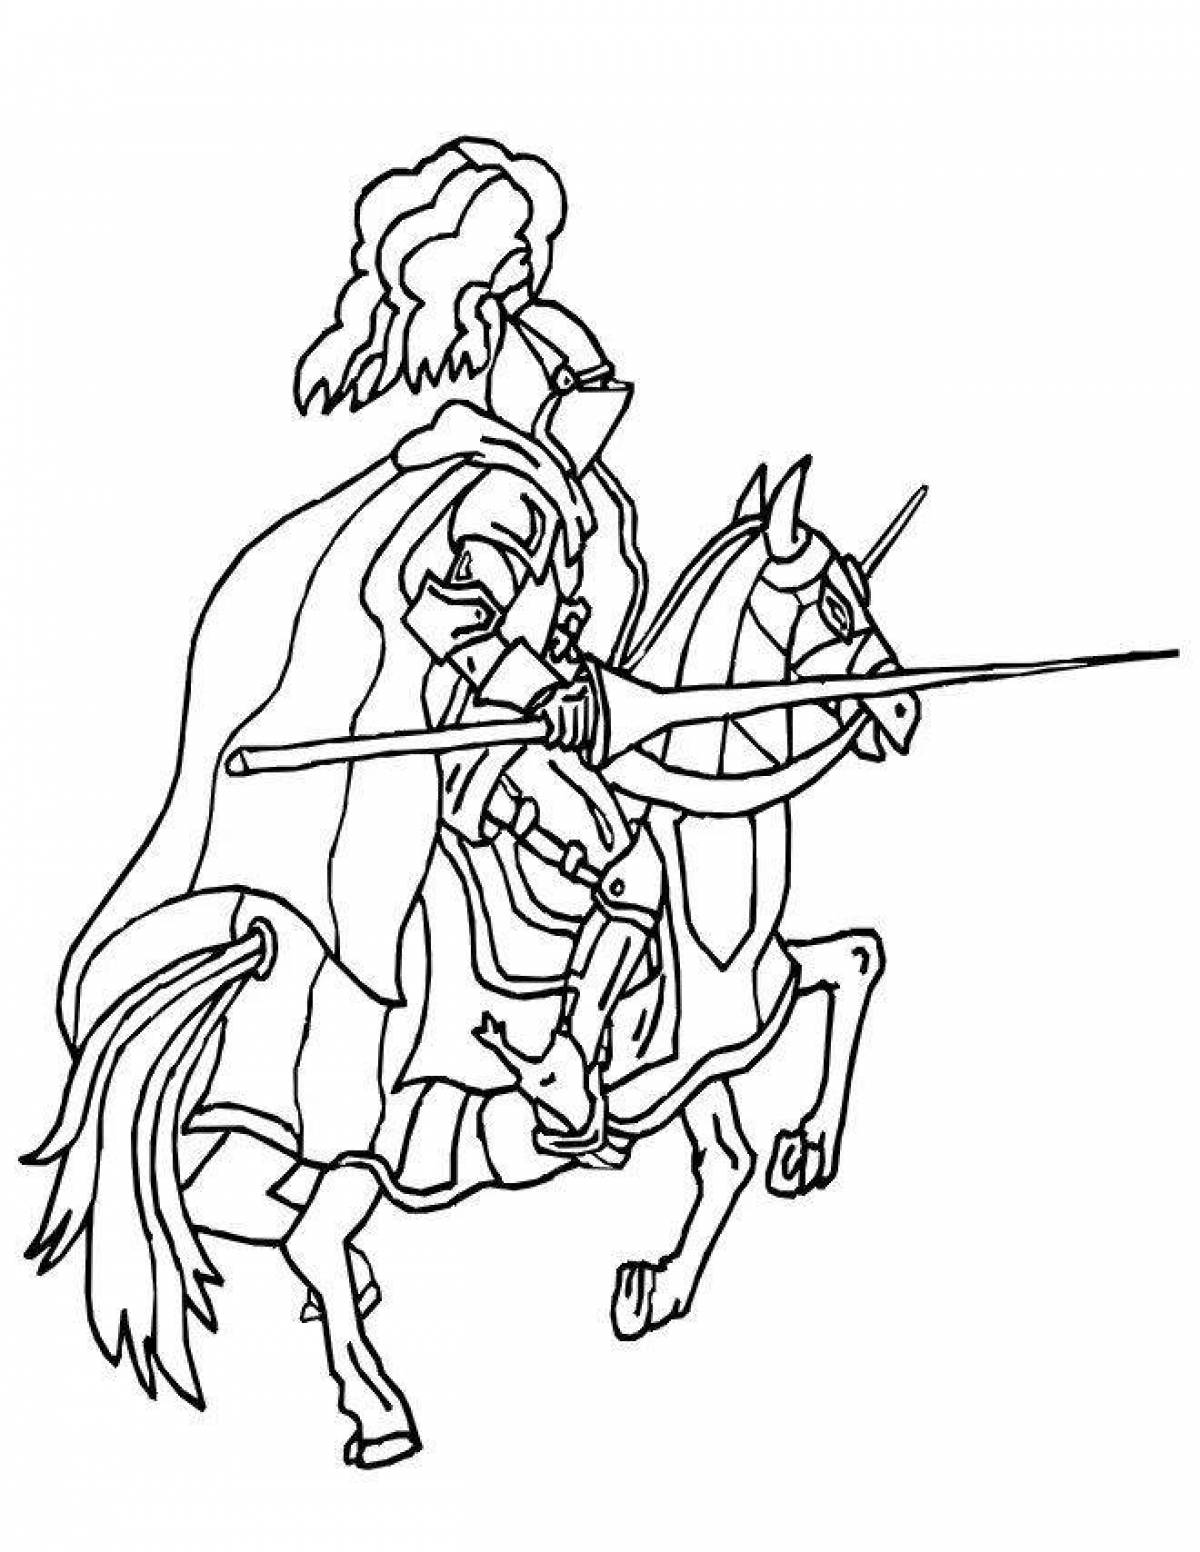 Exalted knight on horseback coloring page